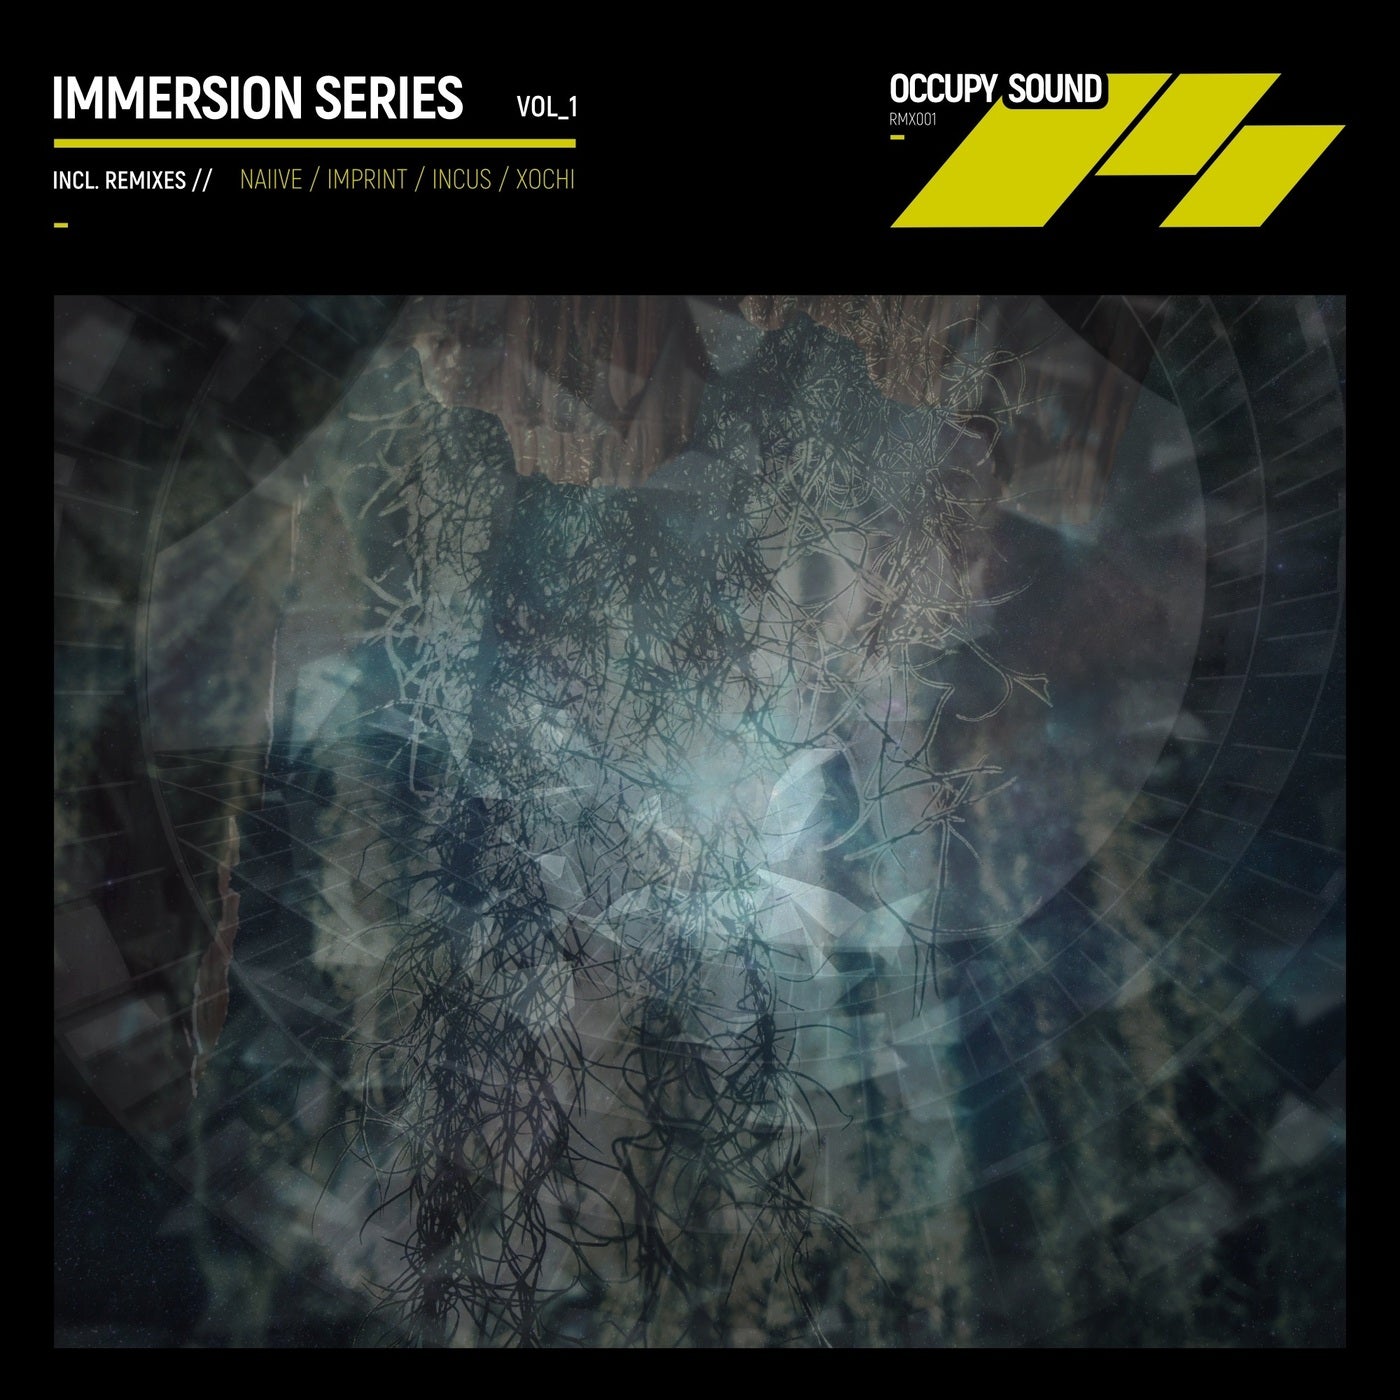 Immersion Series Vol.1